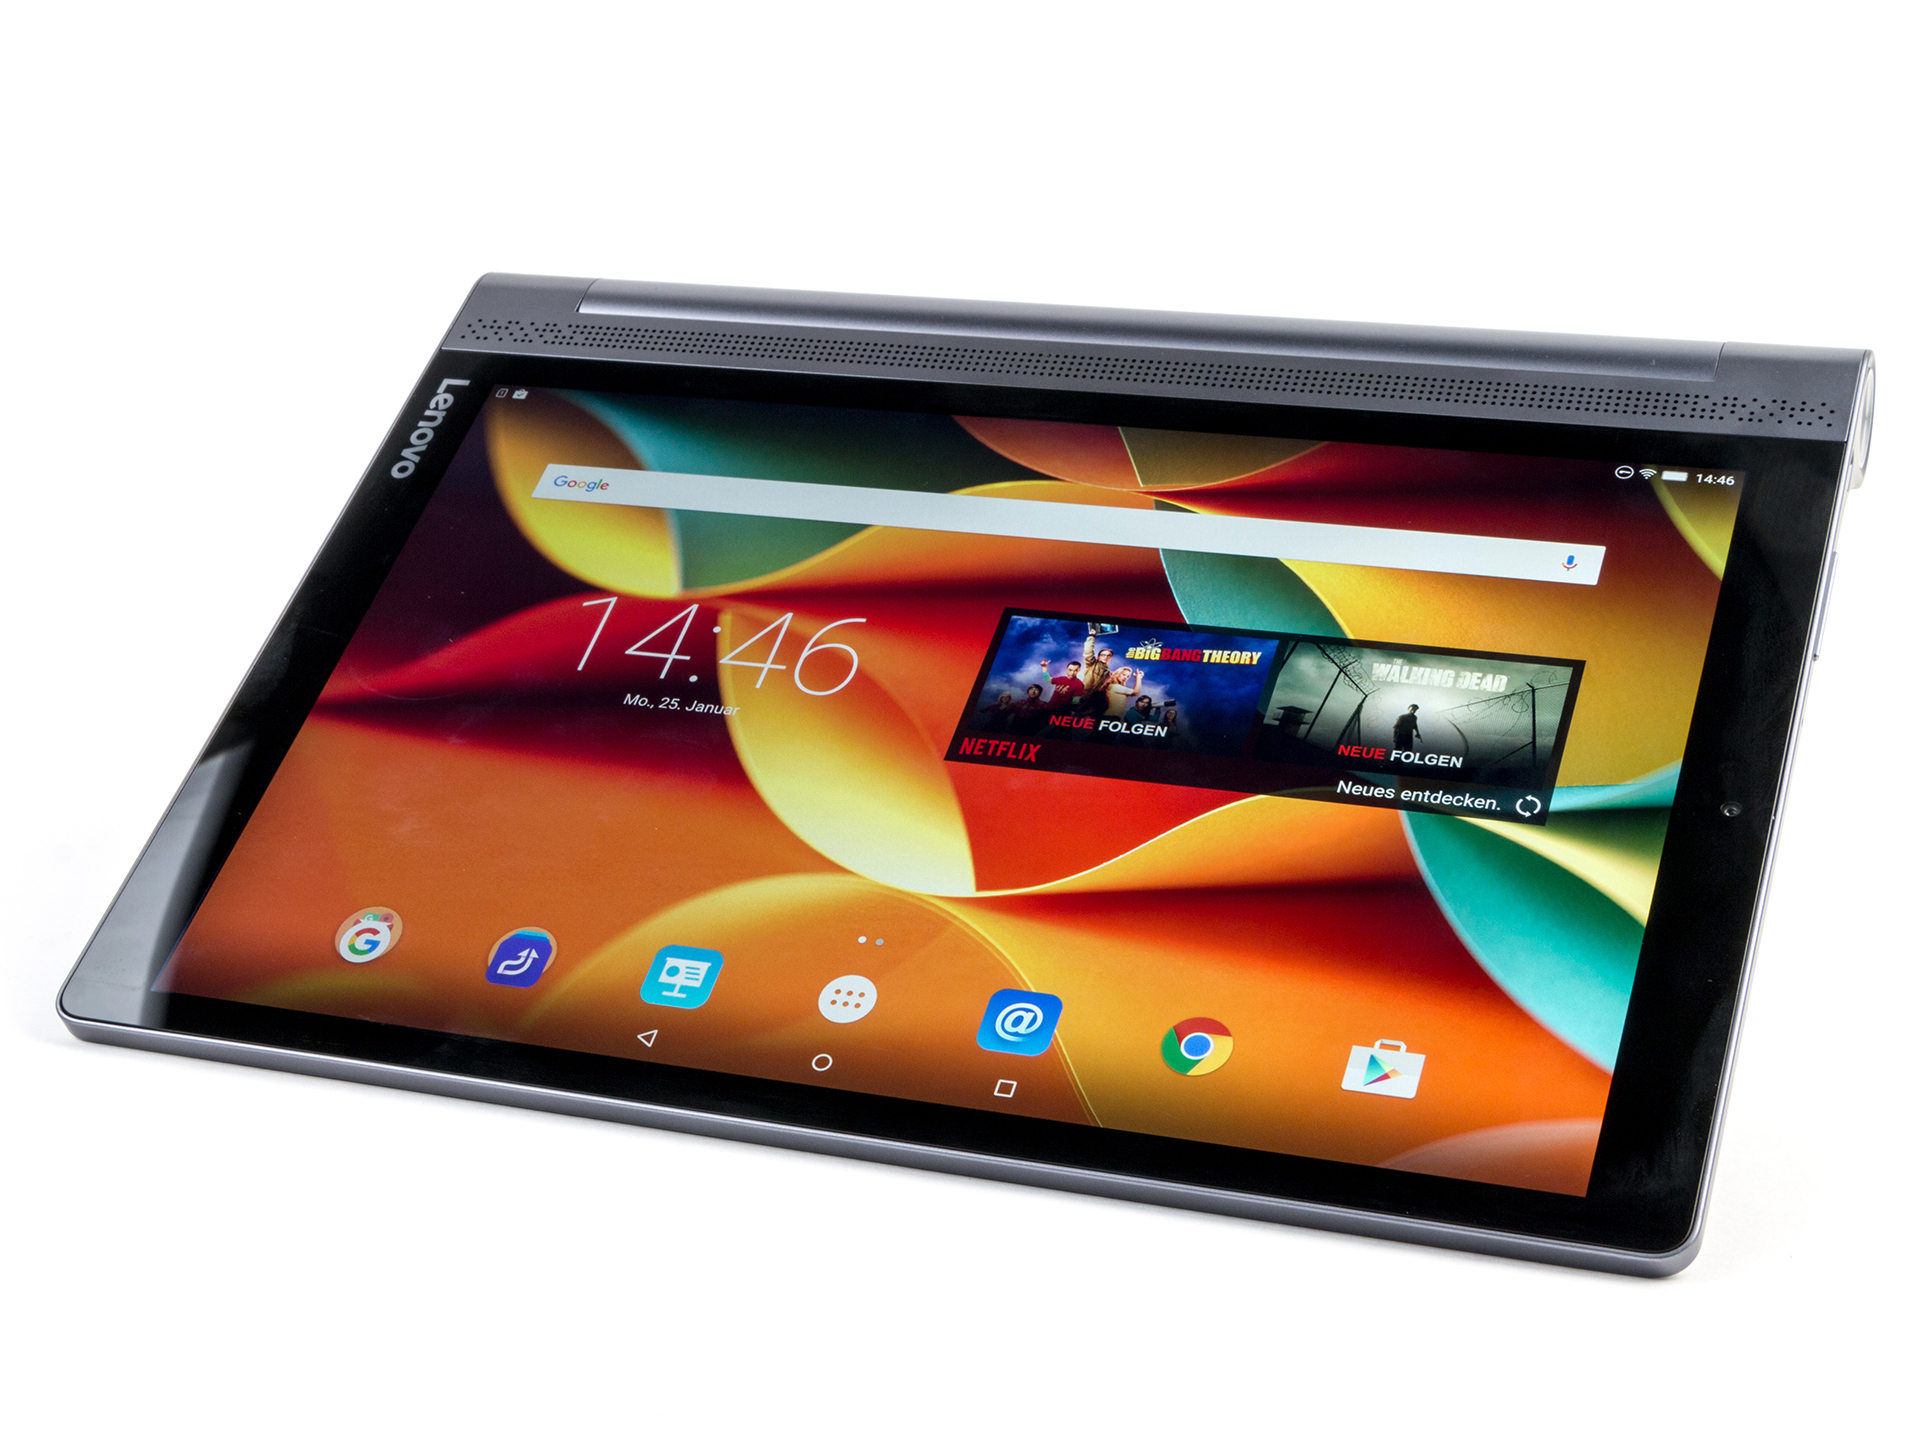 Lenovo Yoga Tab 3 Pro 10 Tablet Review - NotebookCheck.net Reviews